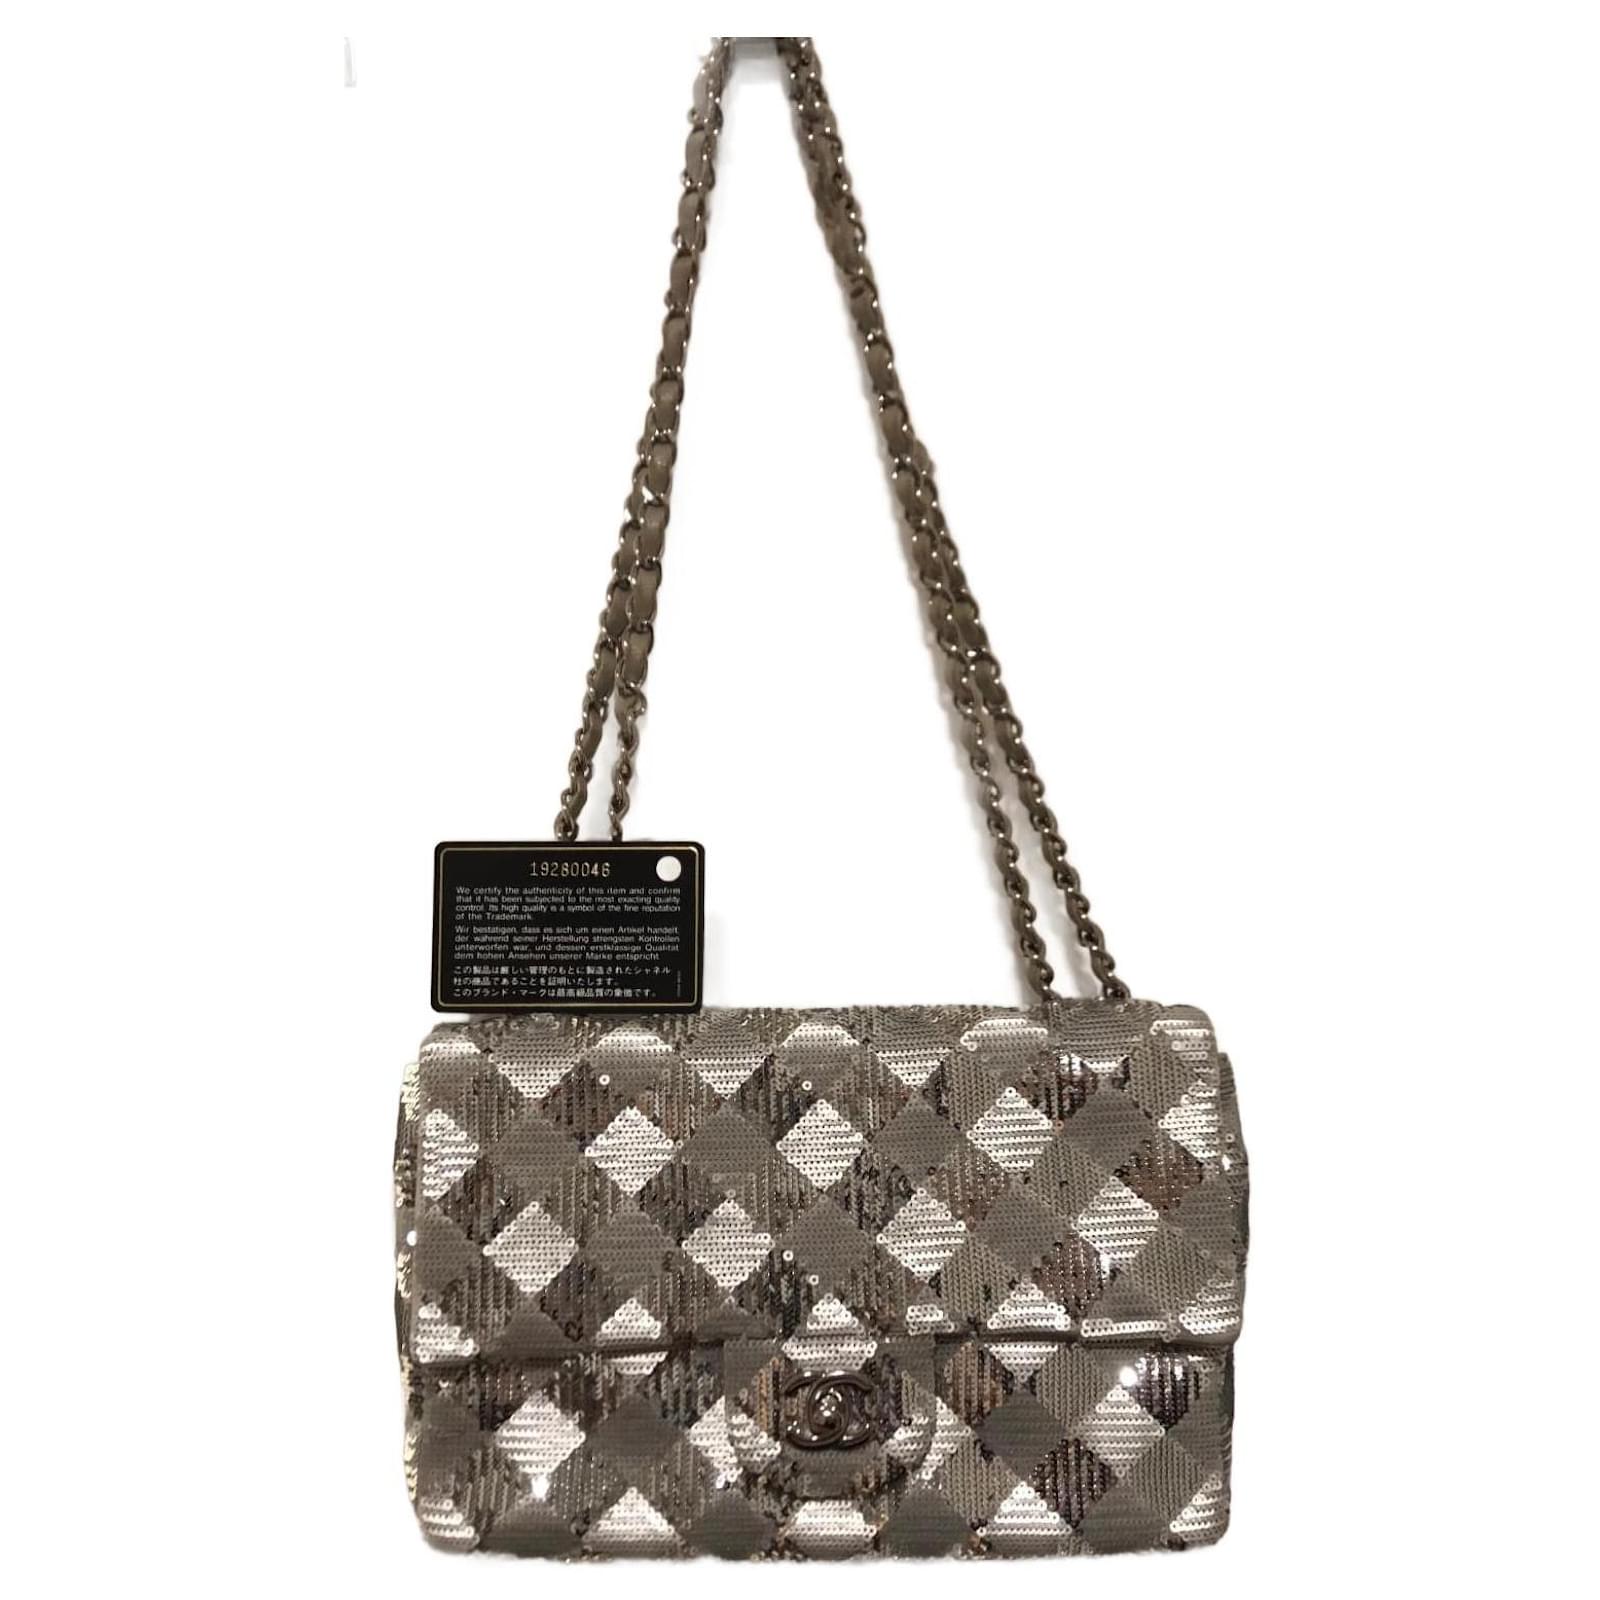 Stunning Chanel MEDIUM Silver Metallic Sequins Quilted Geometric Pattern  Classic Timeless Single Flap Bag with Shiny Silver Tone Hardware